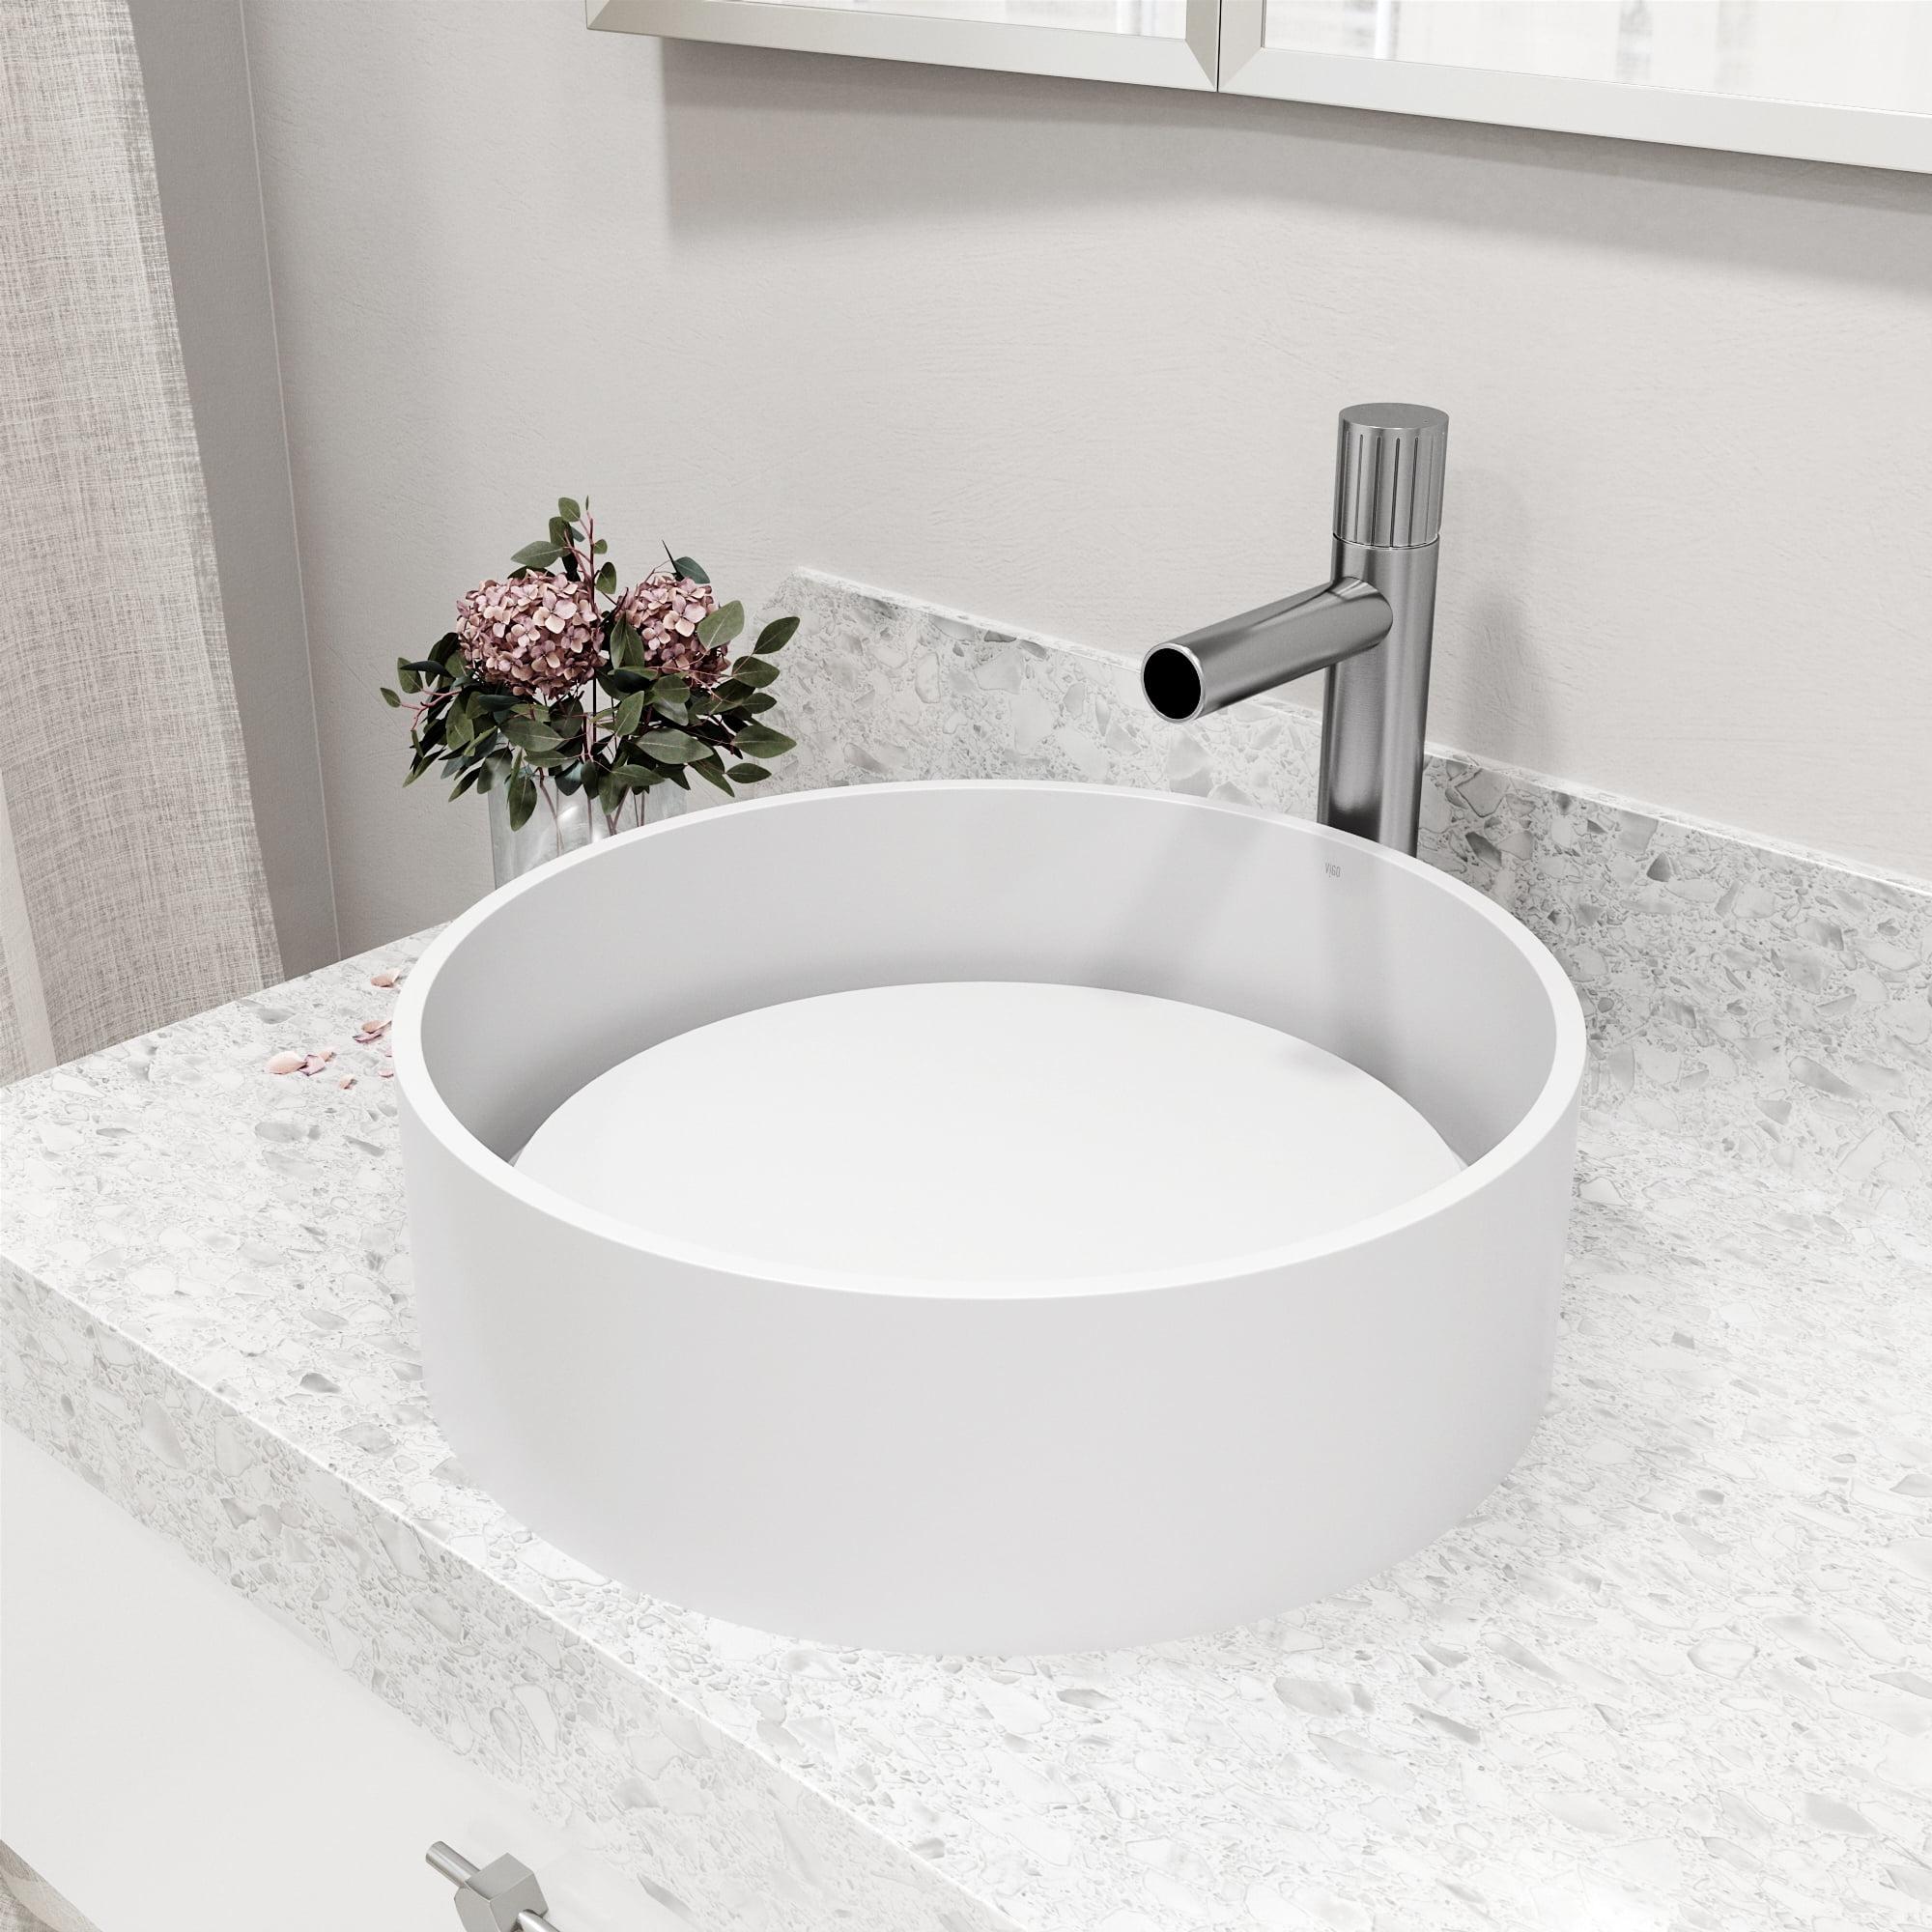 Serenity Stone 16" White Circular Above-Counter Vessel Sink with Brushed Nickel Faucet